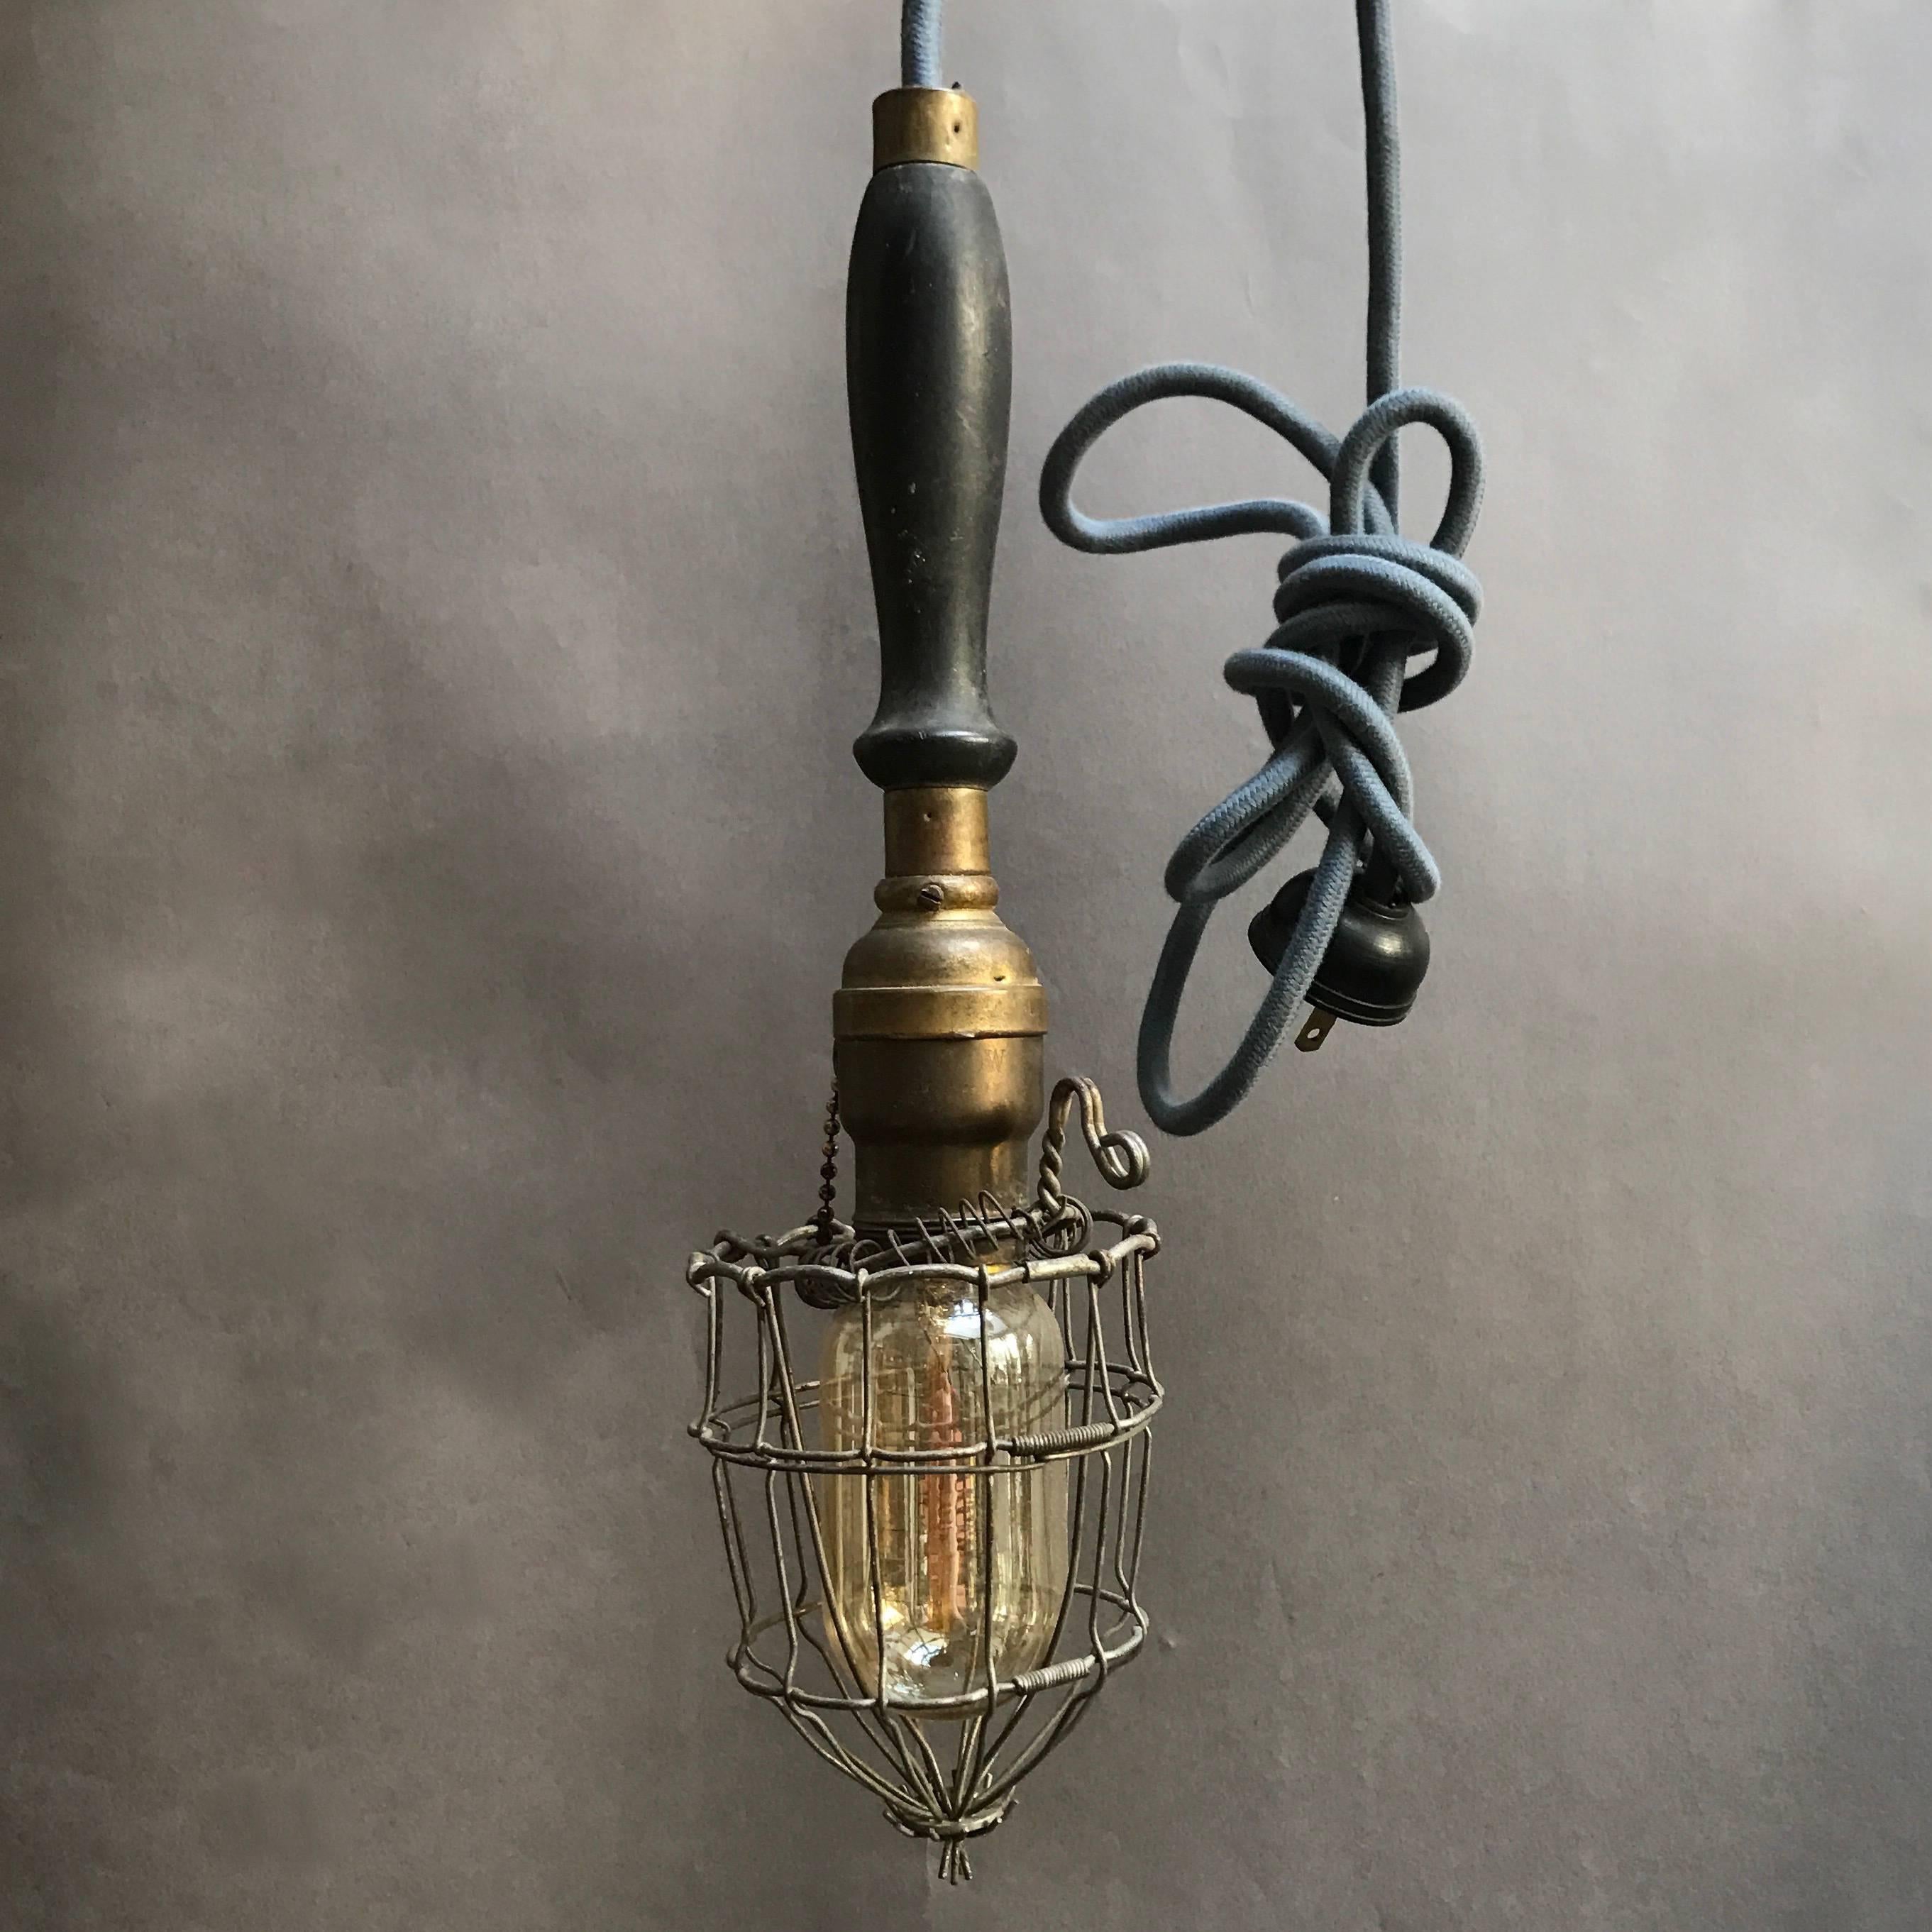 American Industrial Caged Utility Light Pendant with Wood Handle